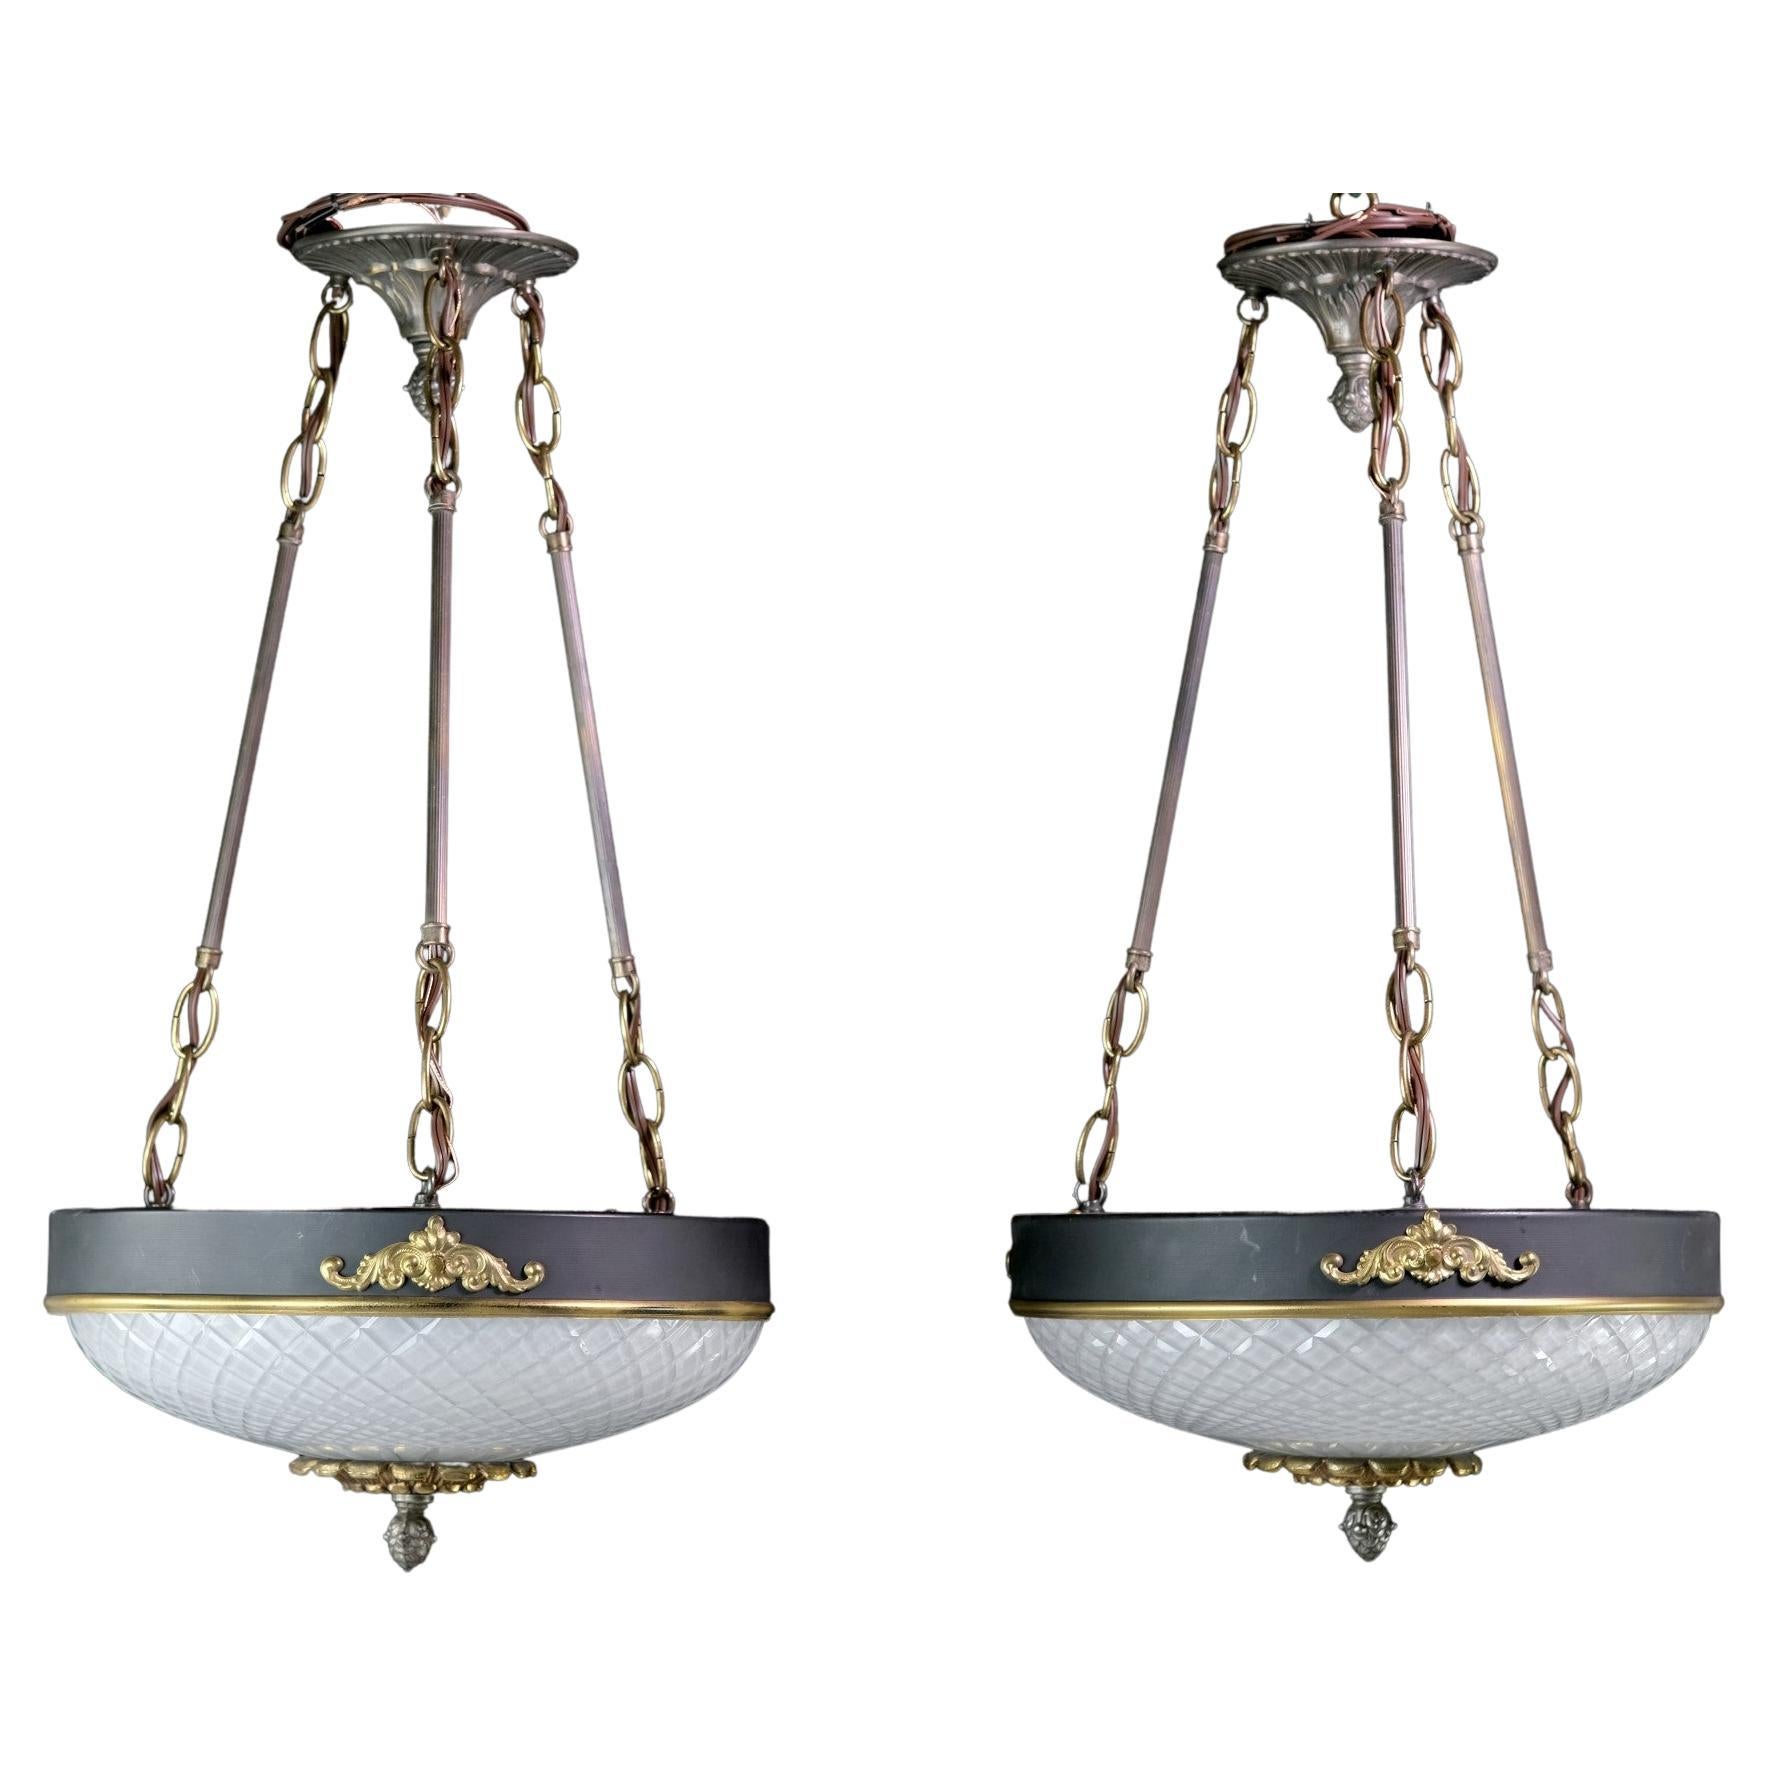 NYC Waldorf Astoria Etched Glass Empire Style Pendant Lights, Sold as Pair